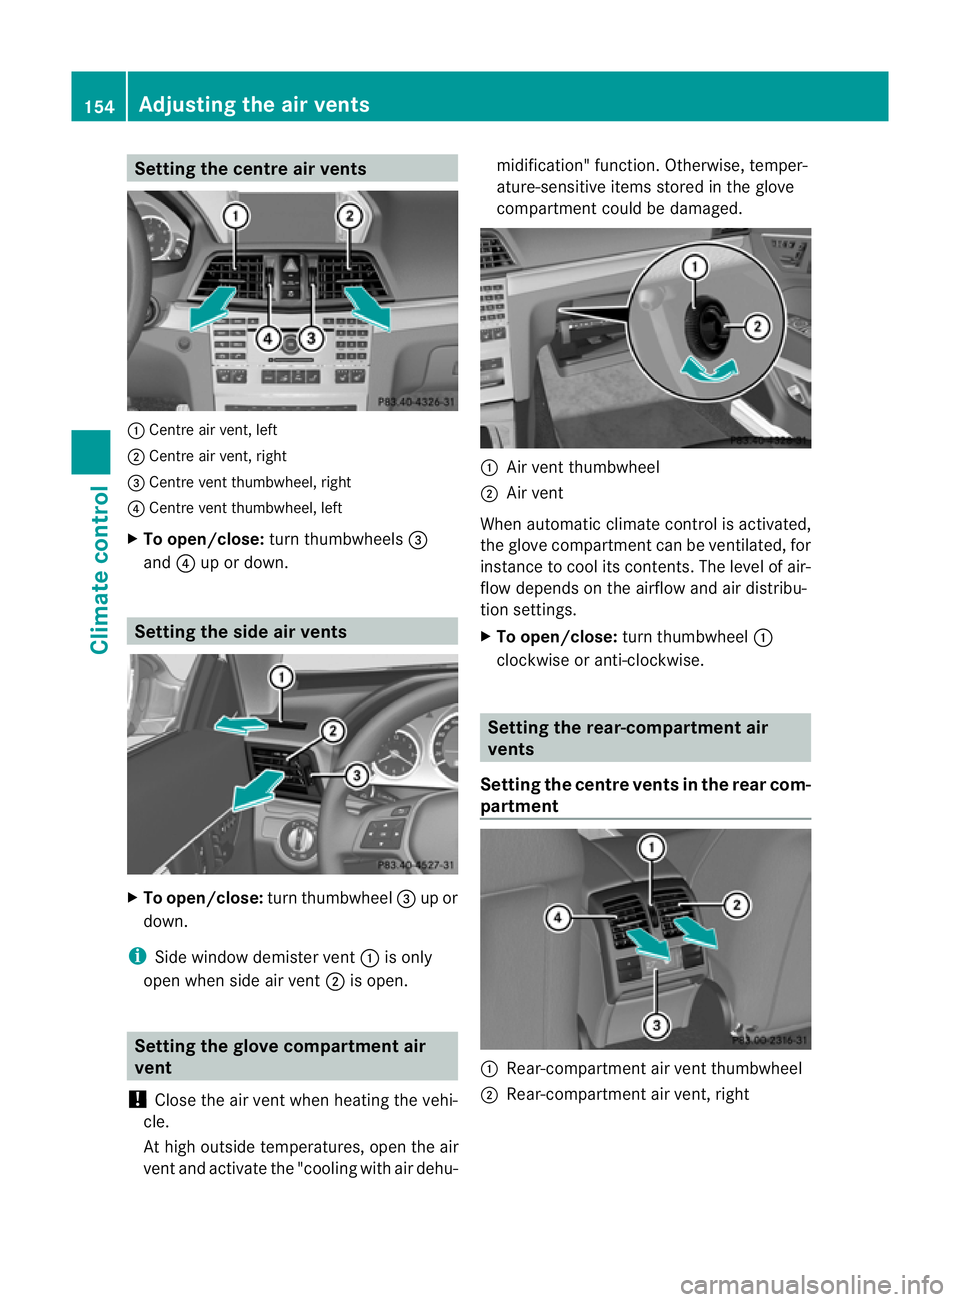 MERCEDES-BENZ E-CLASS CABRIOLET 2012  Owners Manual Setting the centre air vents
:
Centre air vent, left
; Centre air vent, right
= Centre vent thumbwheel, right
? Centre vent thumbwheel, left
X To open/close: turn thumbwheels =
and ?up or down. Settin